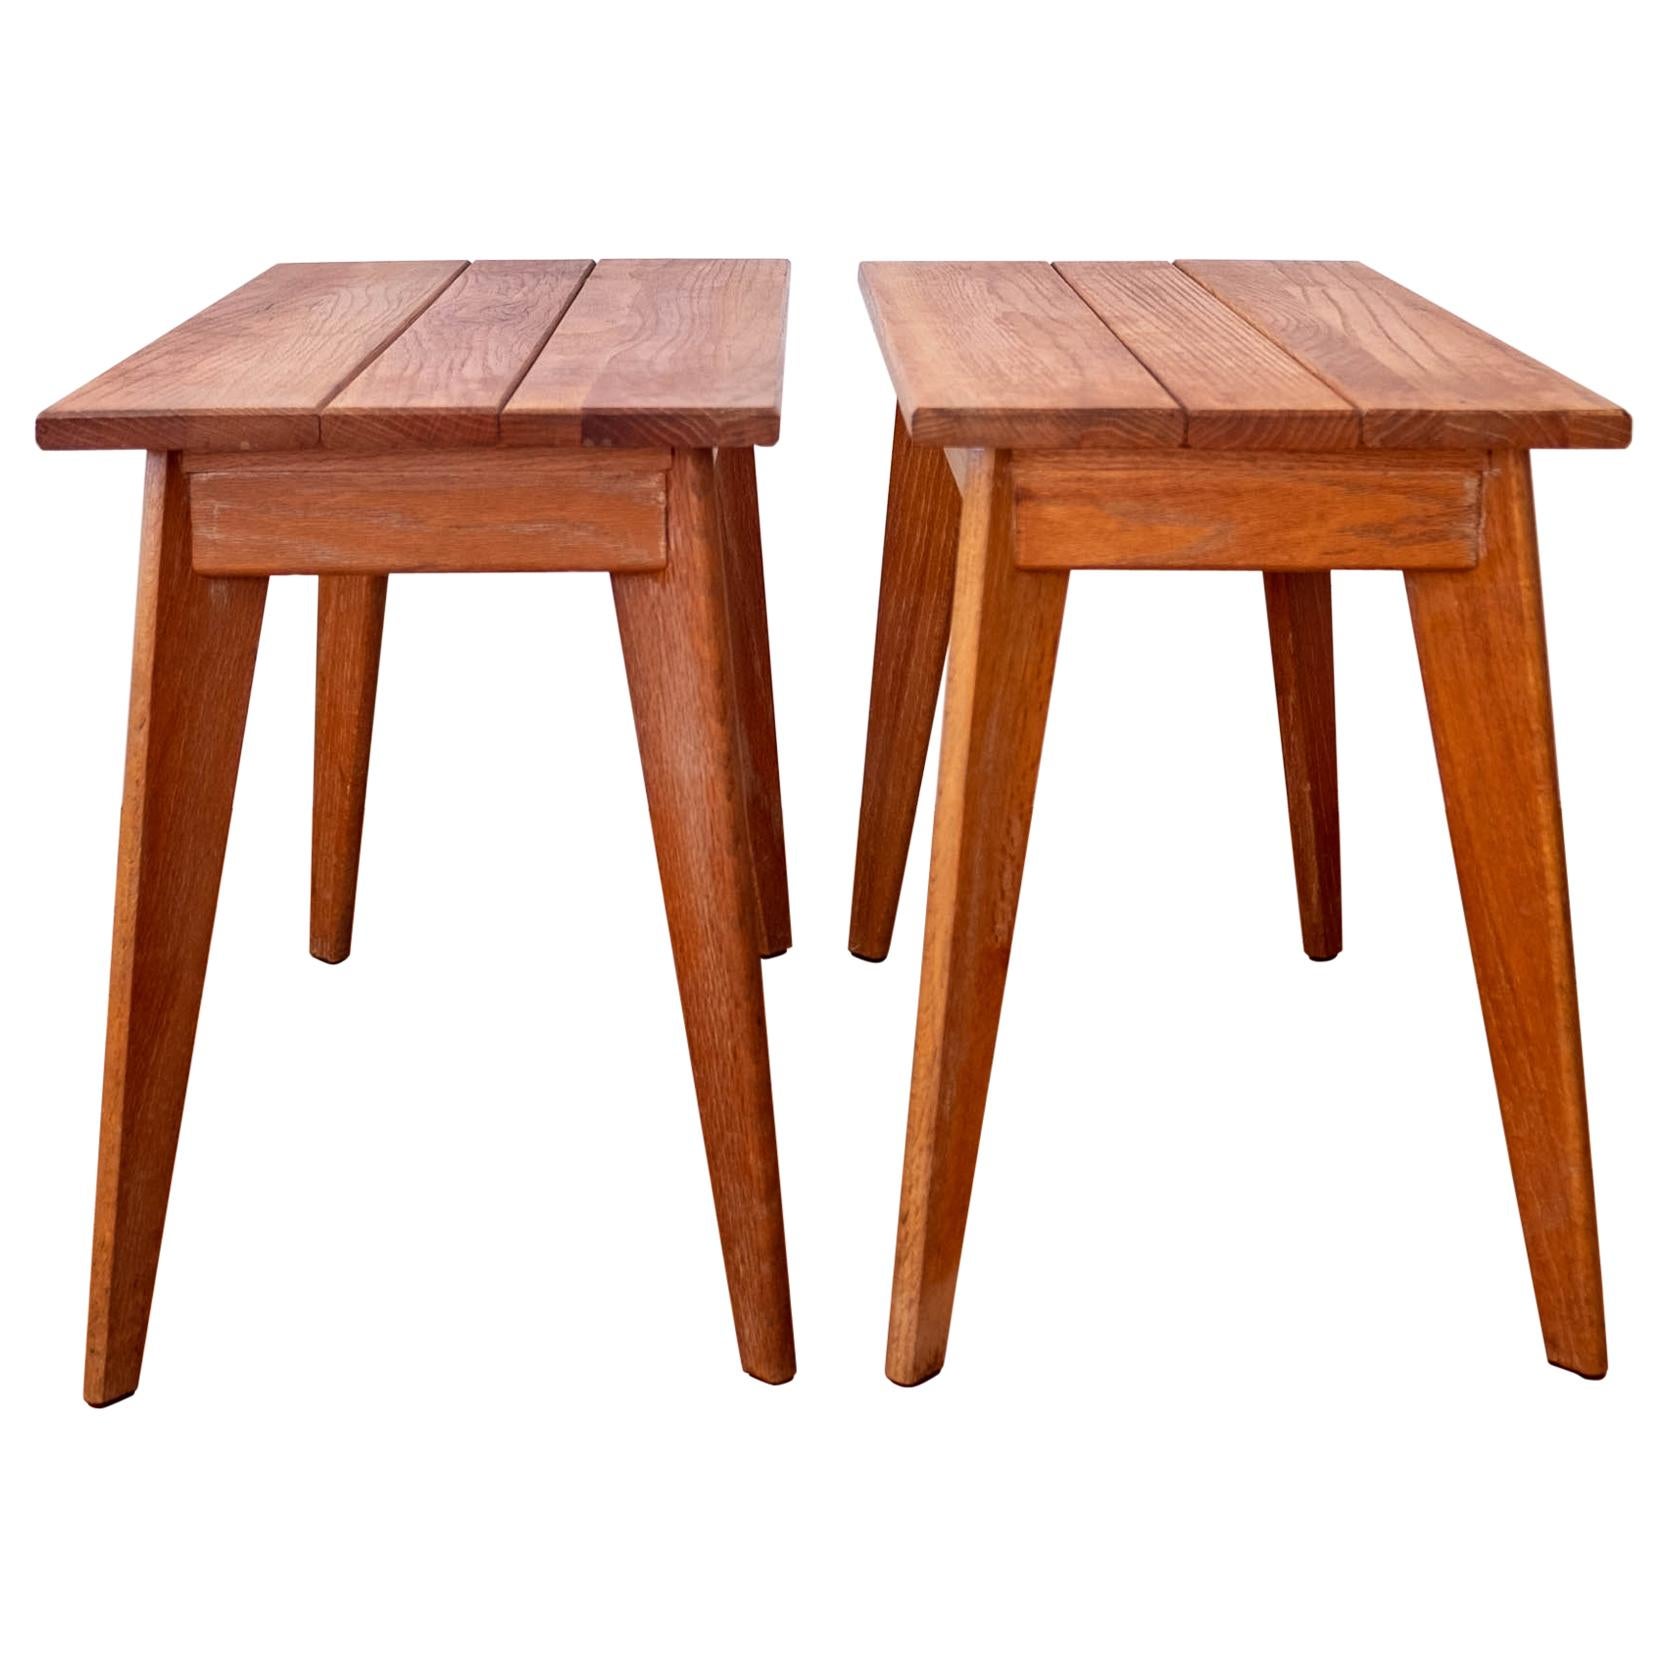 Pair of 1940s Limed Oak Side Tables